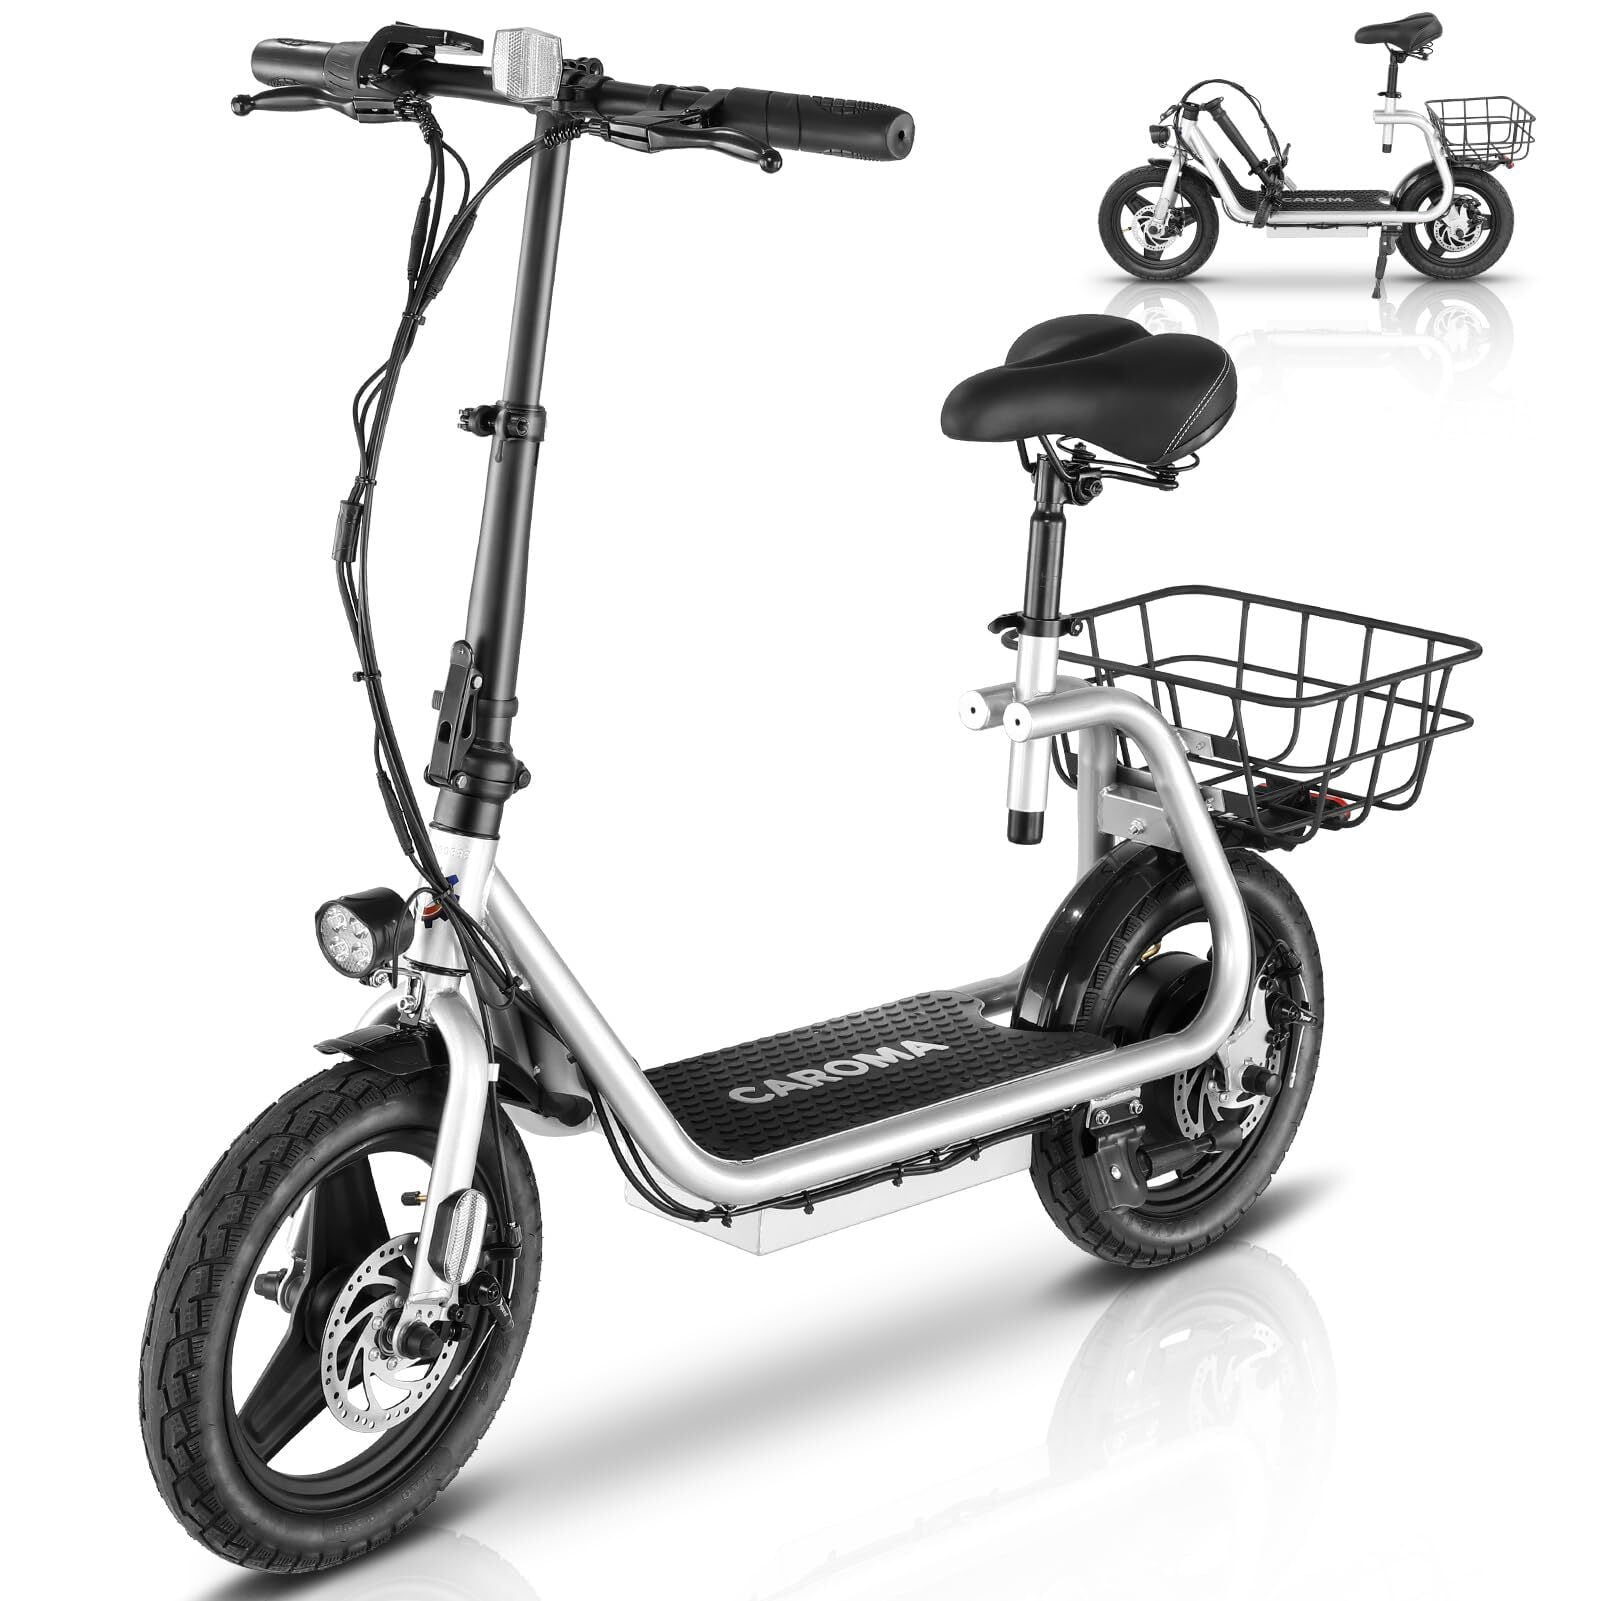 Caroma 800W(Peak) Adults Electric Scooter with Removable Seat, Max Speed 20mph Up to 25 Miles Range, 14" Tire for Commuting Scooter with Basket, Folding Electric Scooter, Silver - image 1 of 9